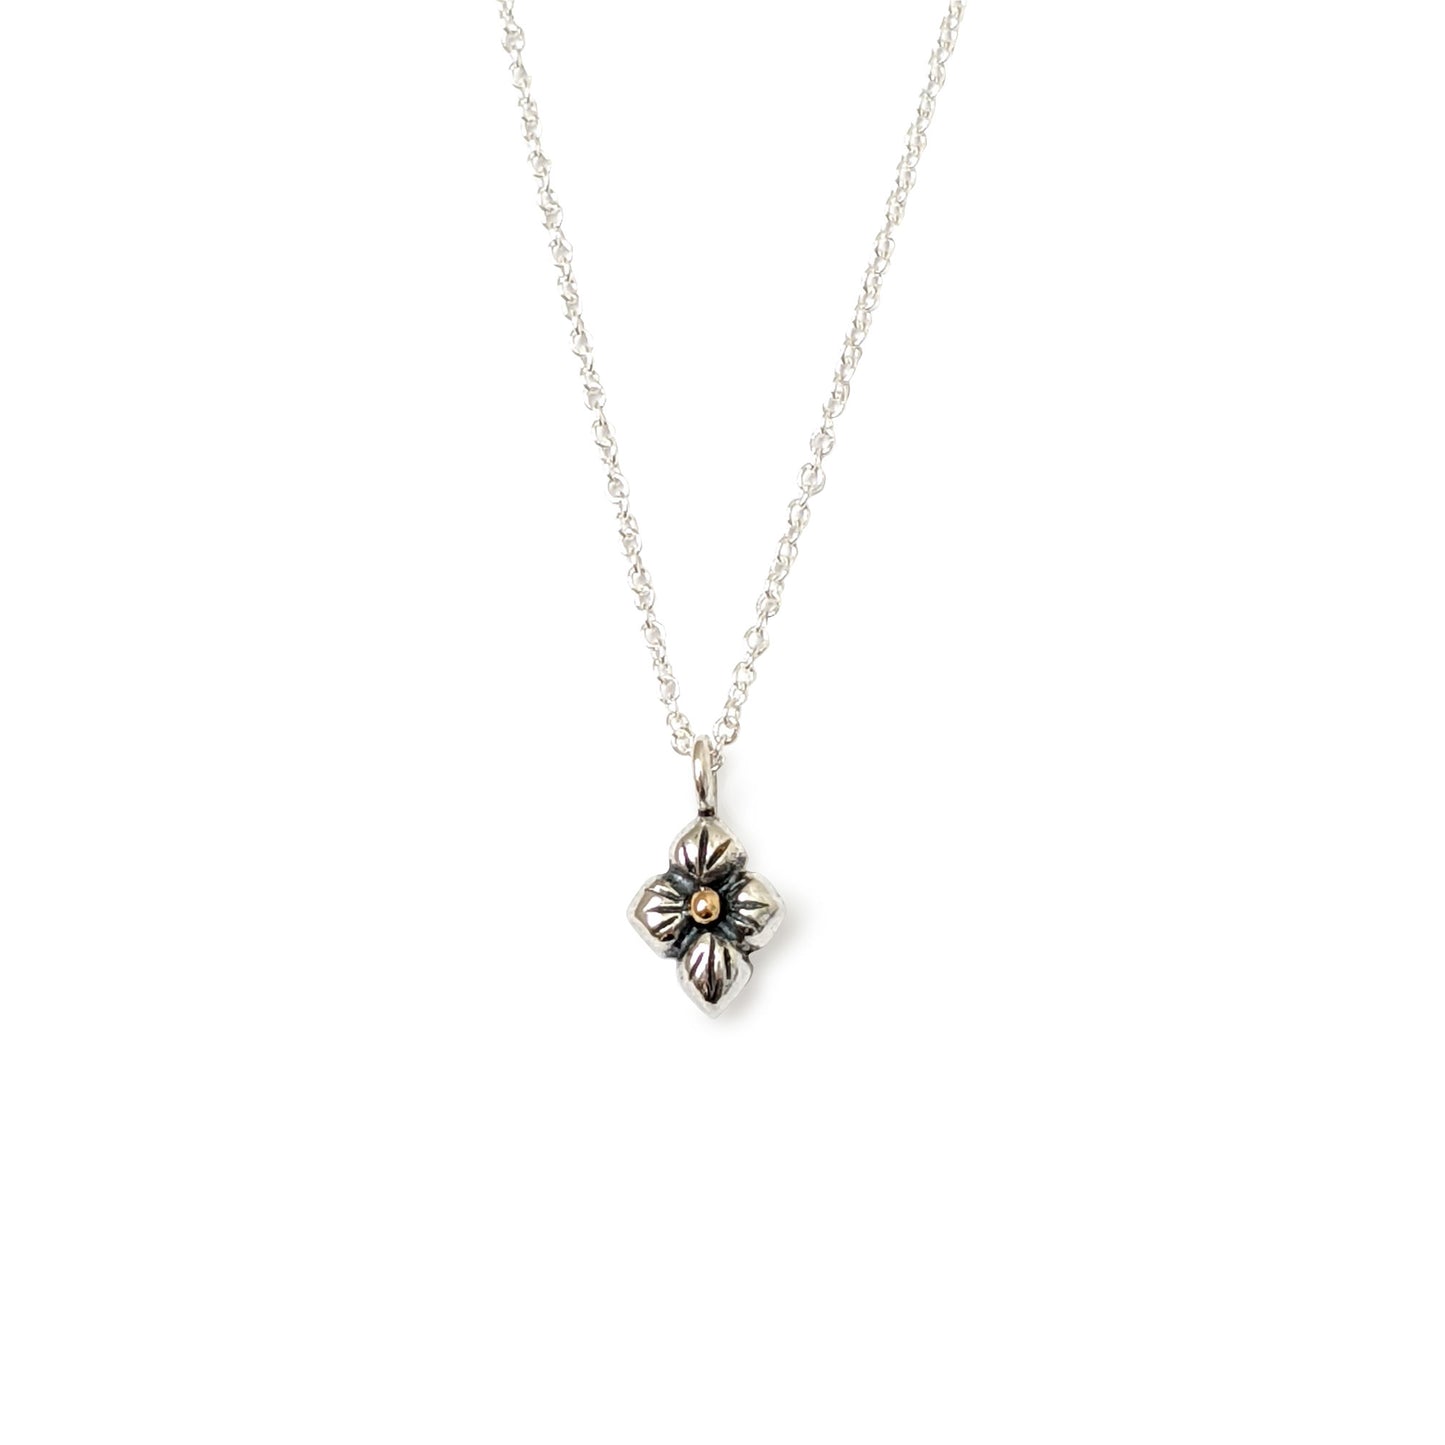 Fairly Floral Necklace